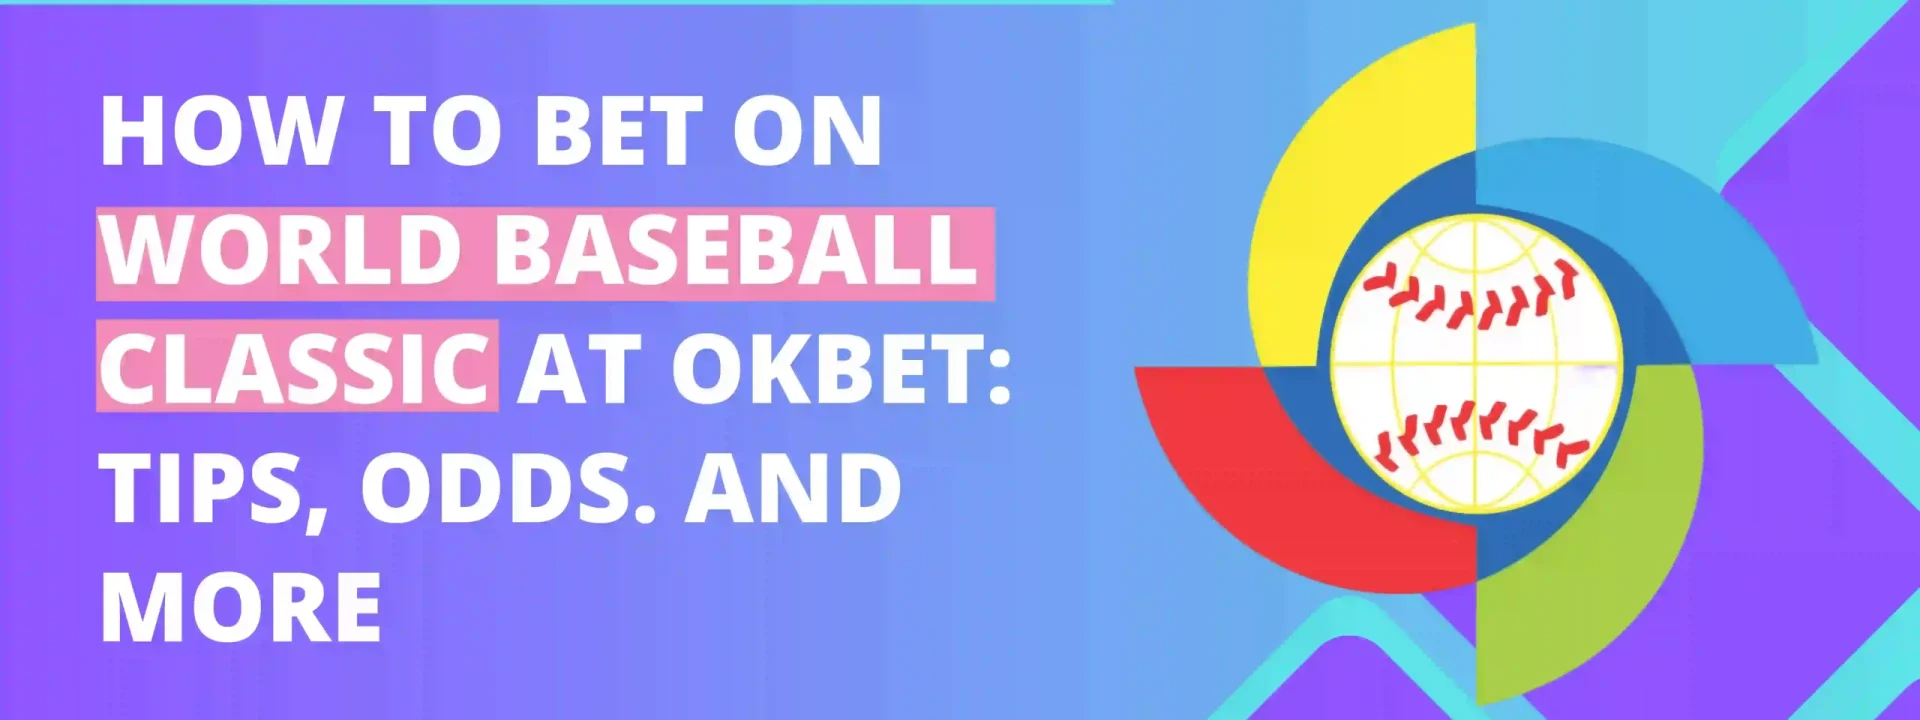 How to Bet on World Baseball Classic at OKBet Tips, Odds. and More